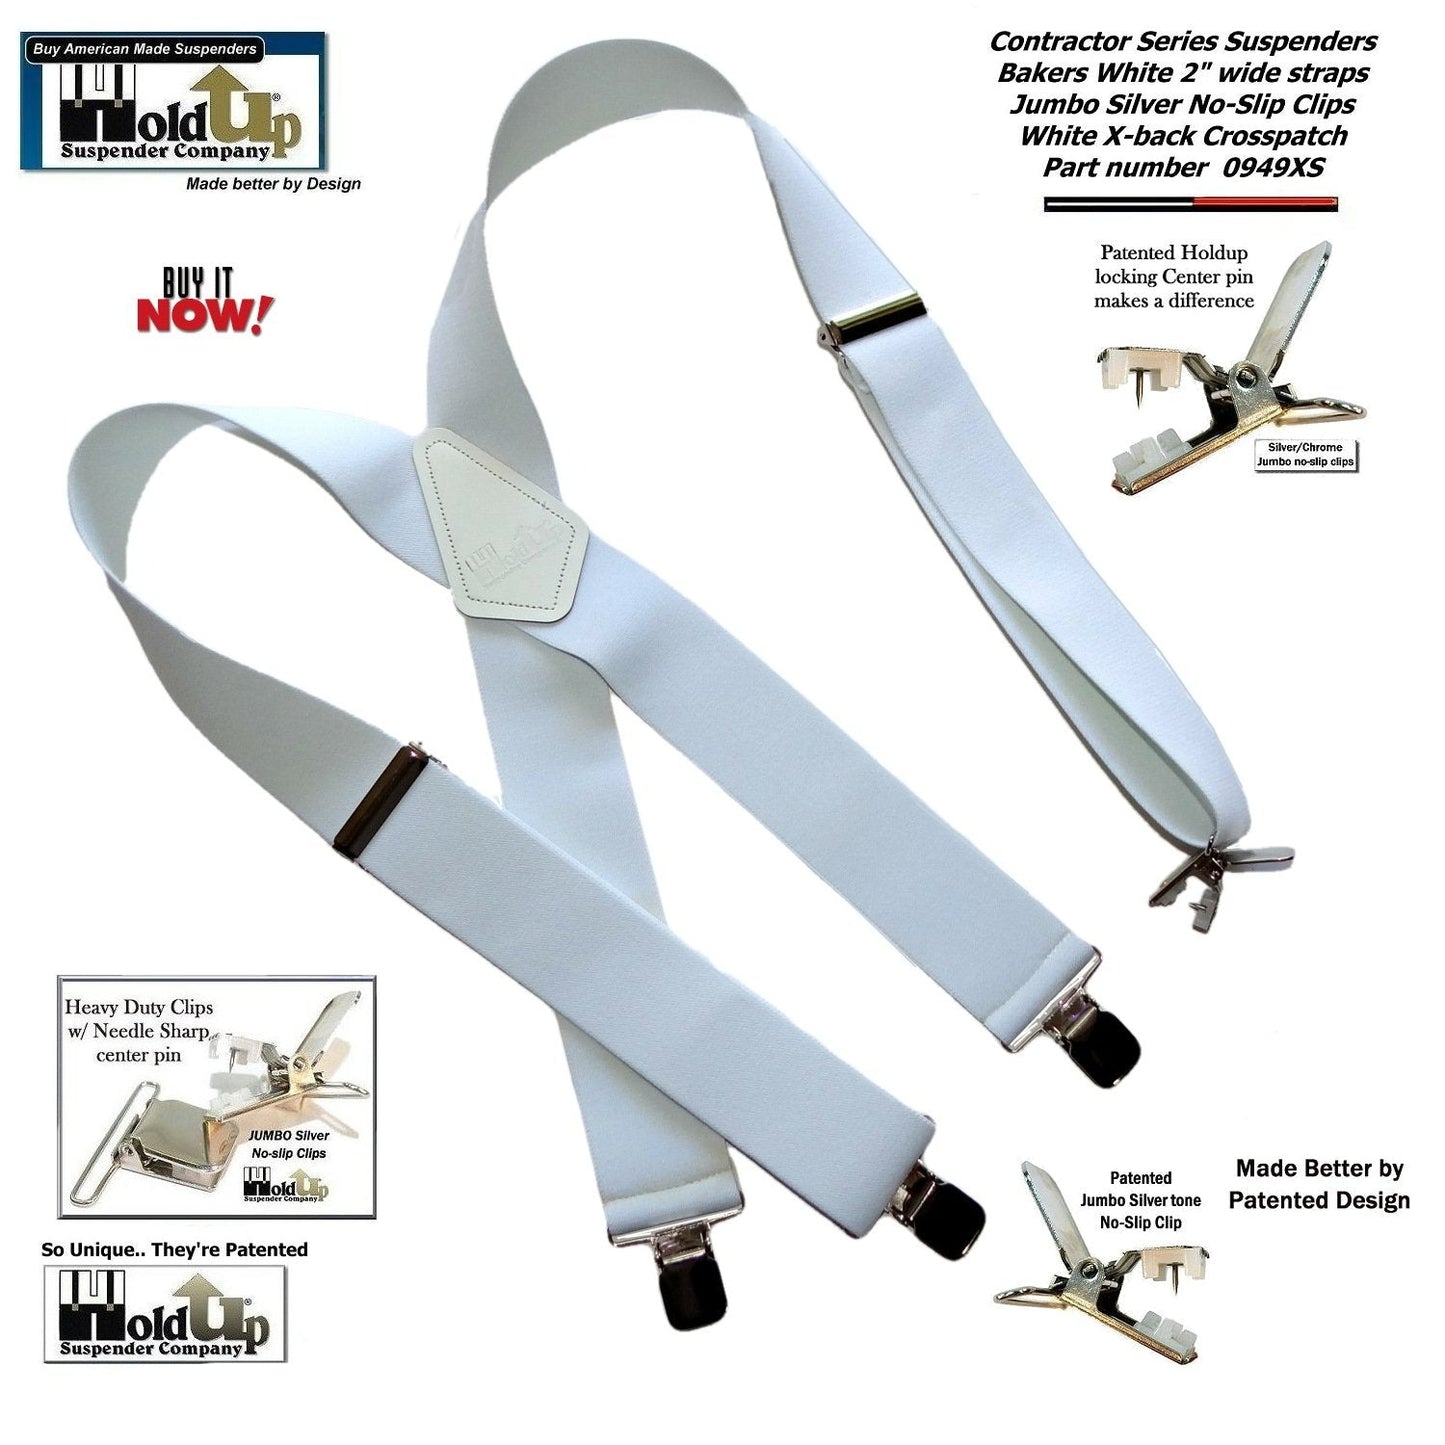 Holdup Suspender Contractor Series Bakers White 2" Wide X-back Suspenders with silver jumbo no-slip clips